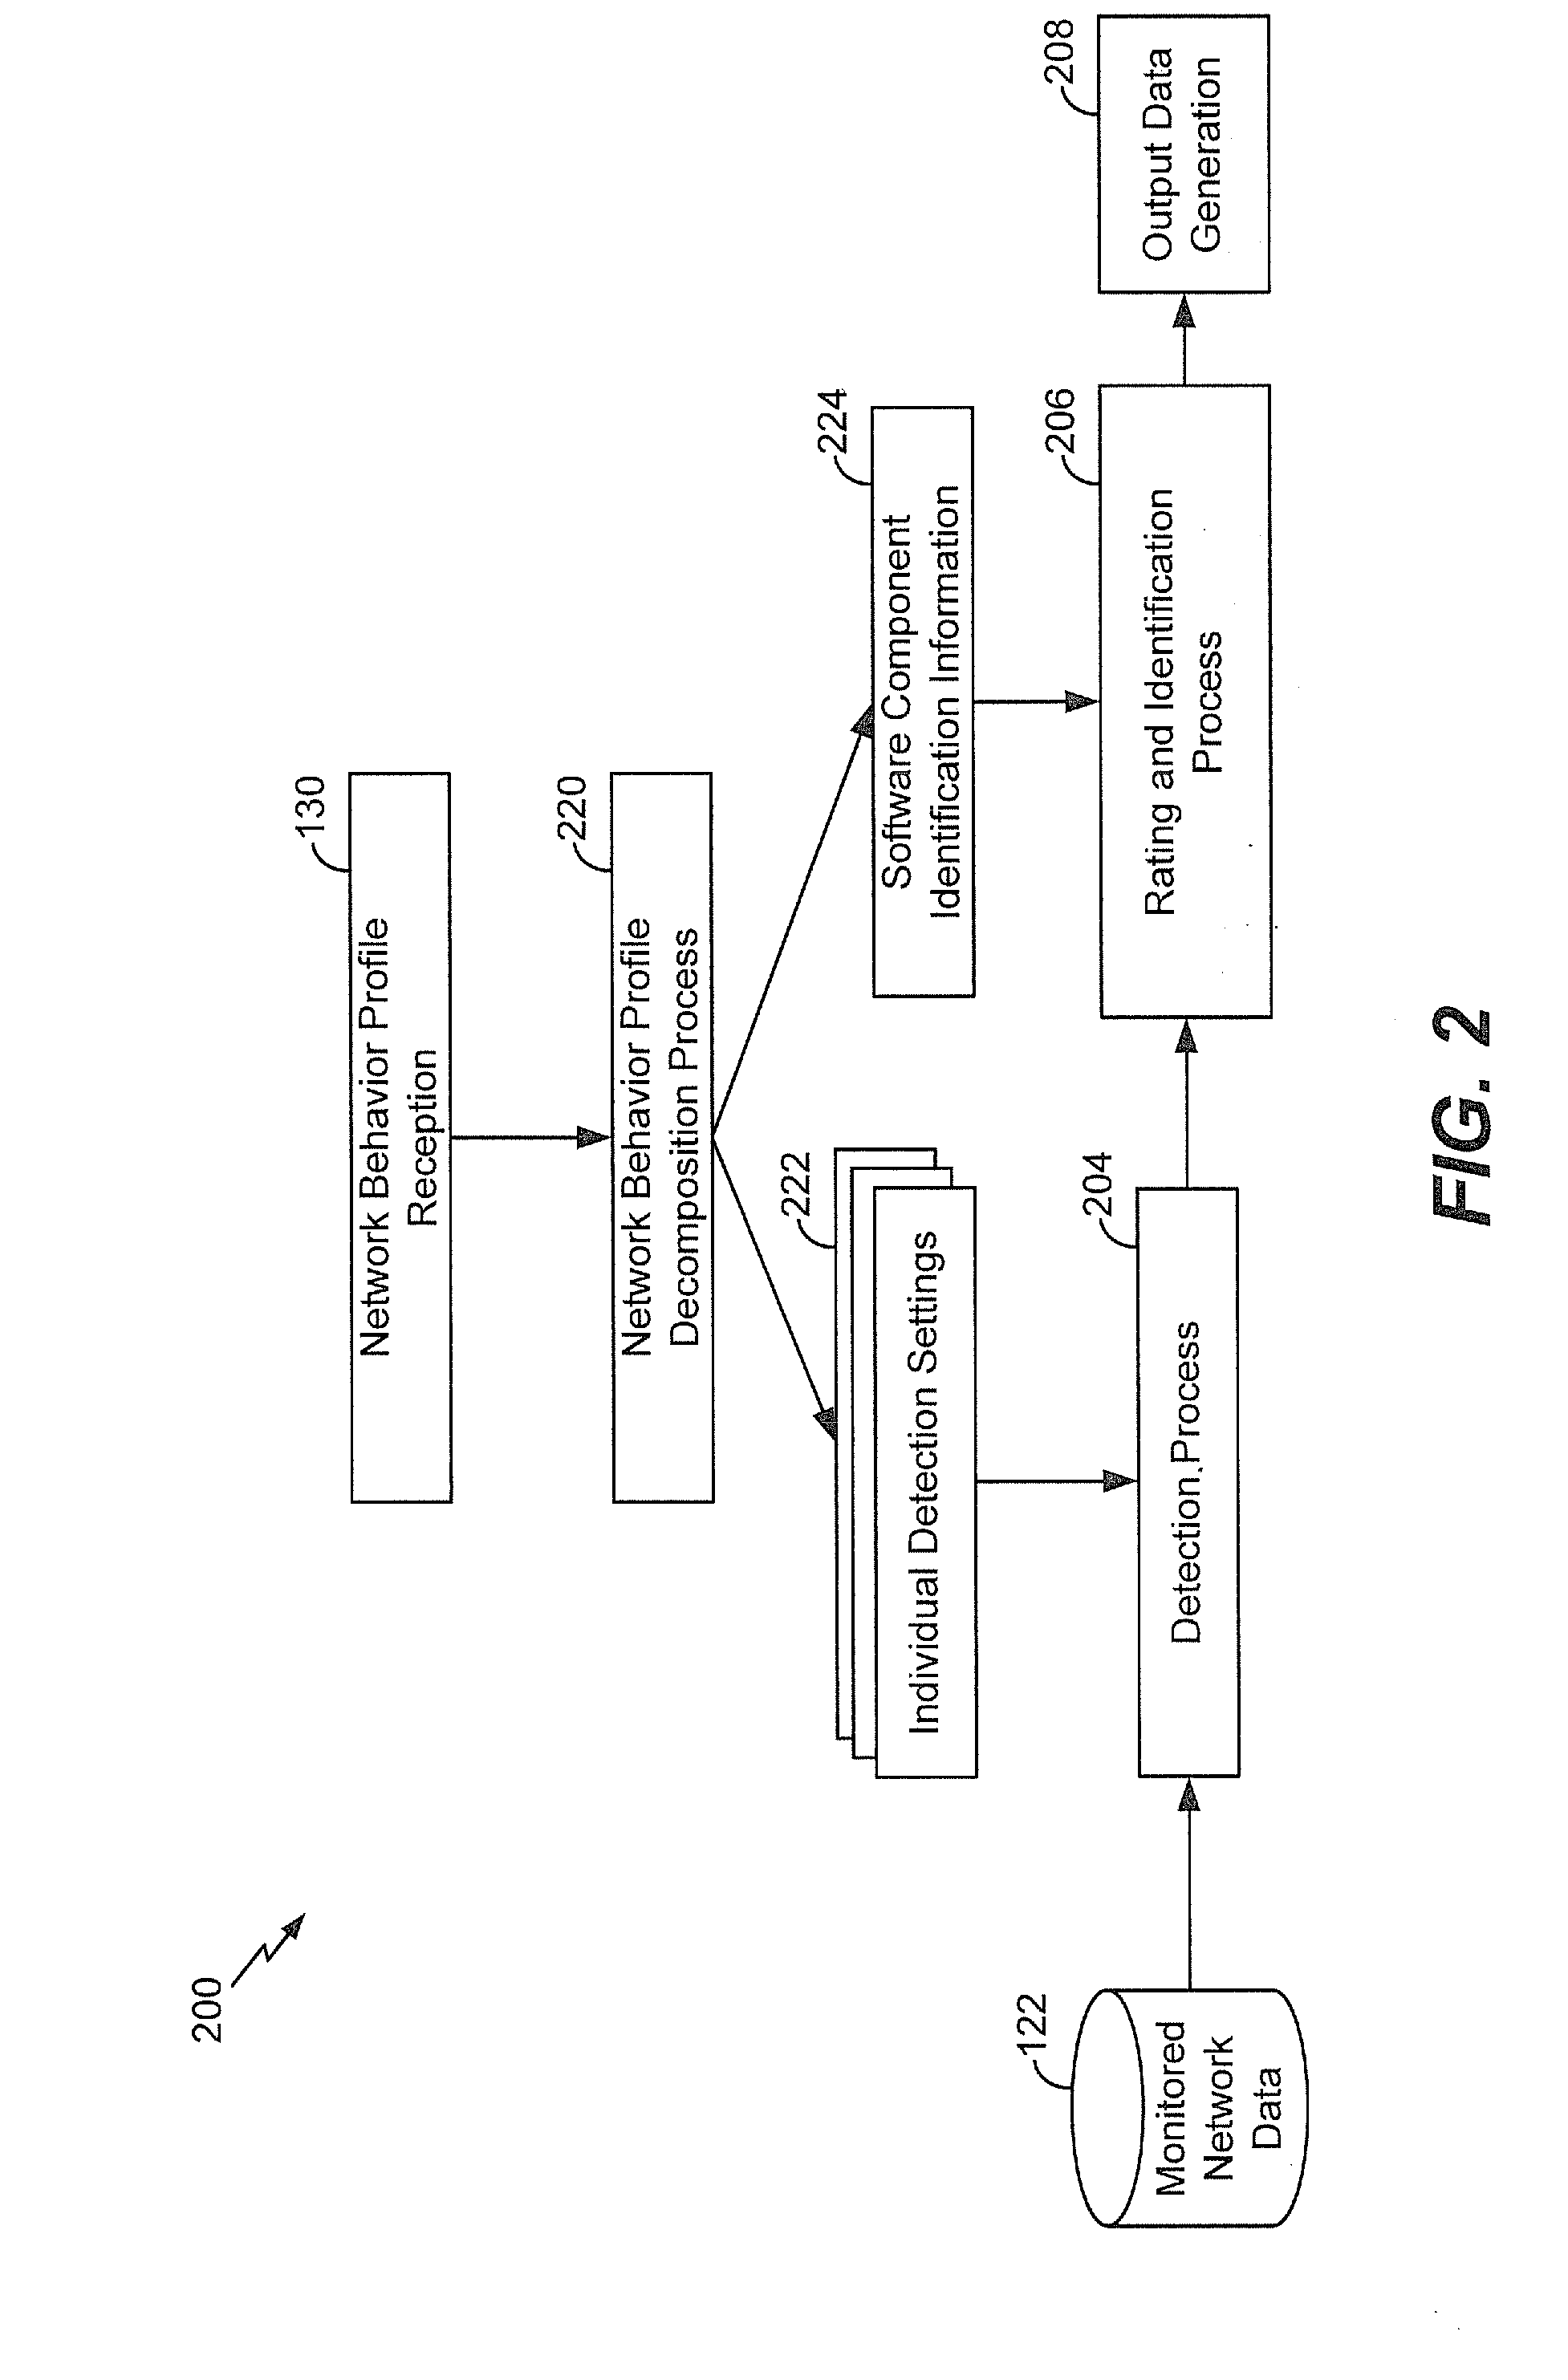 Software network behavior analysis and identification system